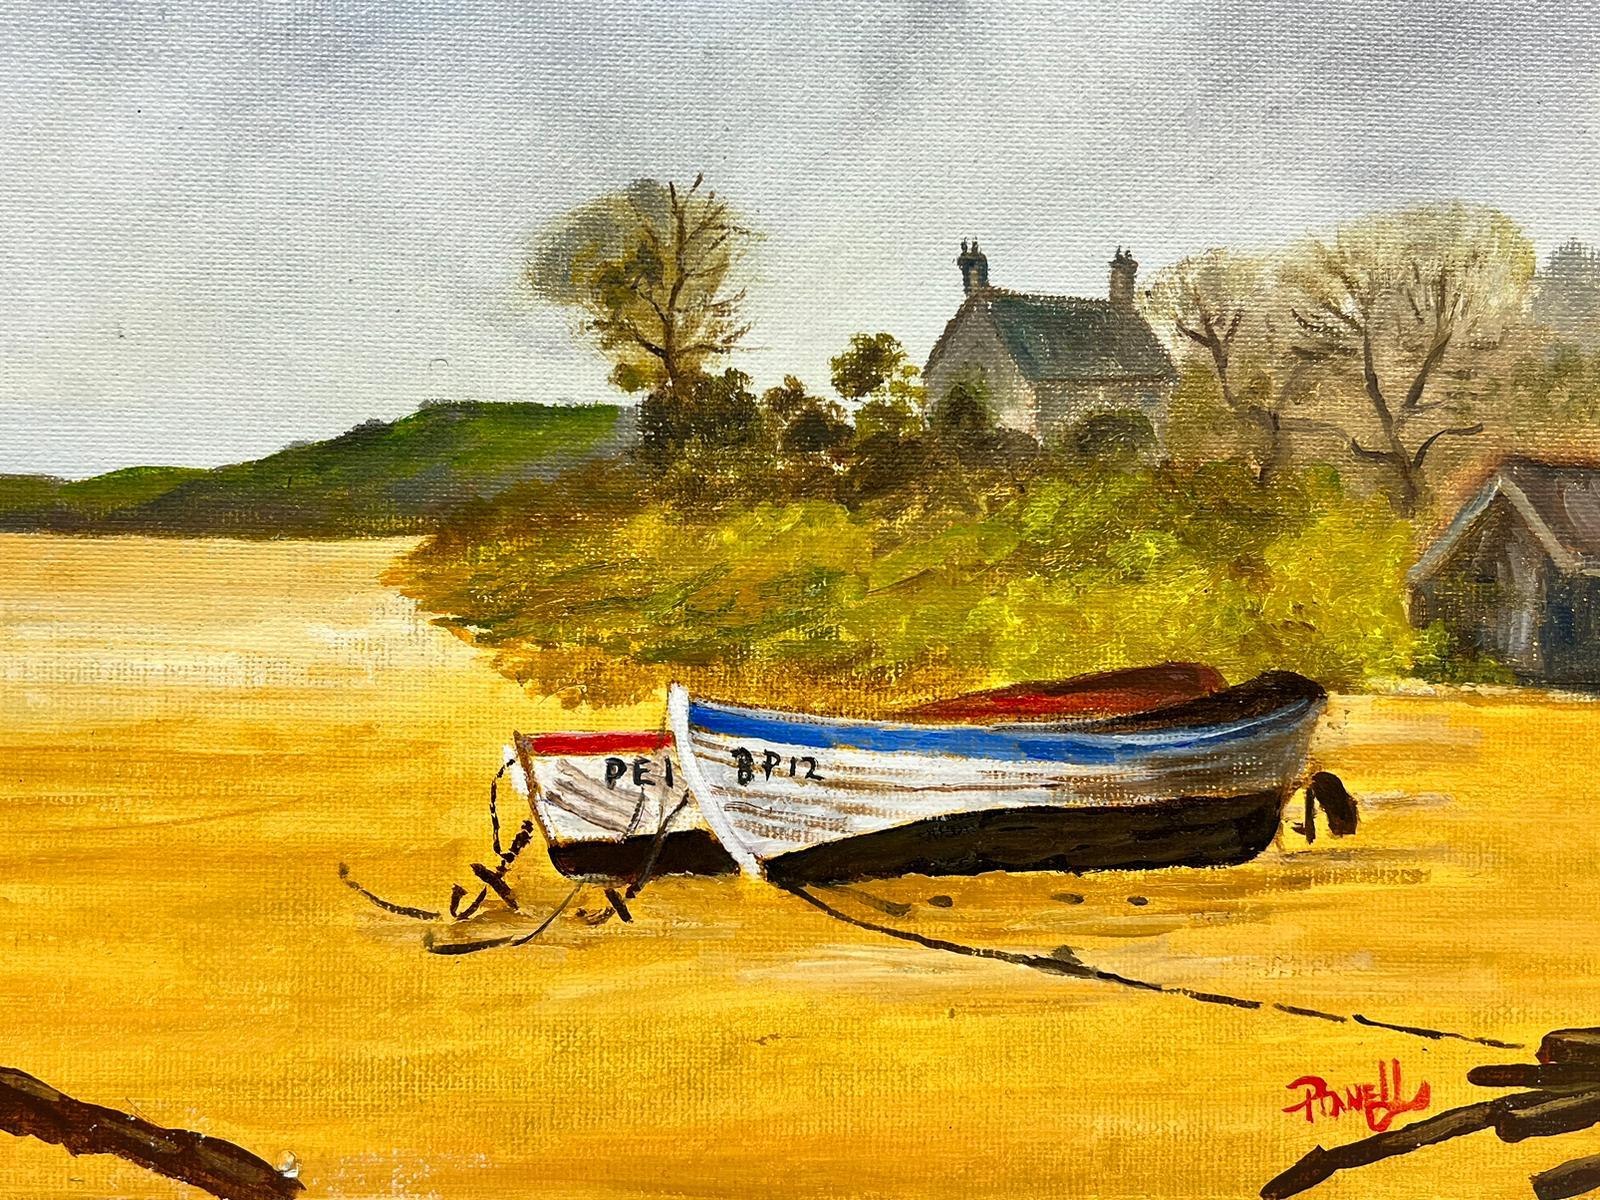 Boats on the Beach
by Ben George Powell, British contemporary artist
signed
acrylic on board stuck on wood, unframed
canvas: 16 x 20 inches
provenance: private collection of this artists work, UK
The painting is in very good and presentable